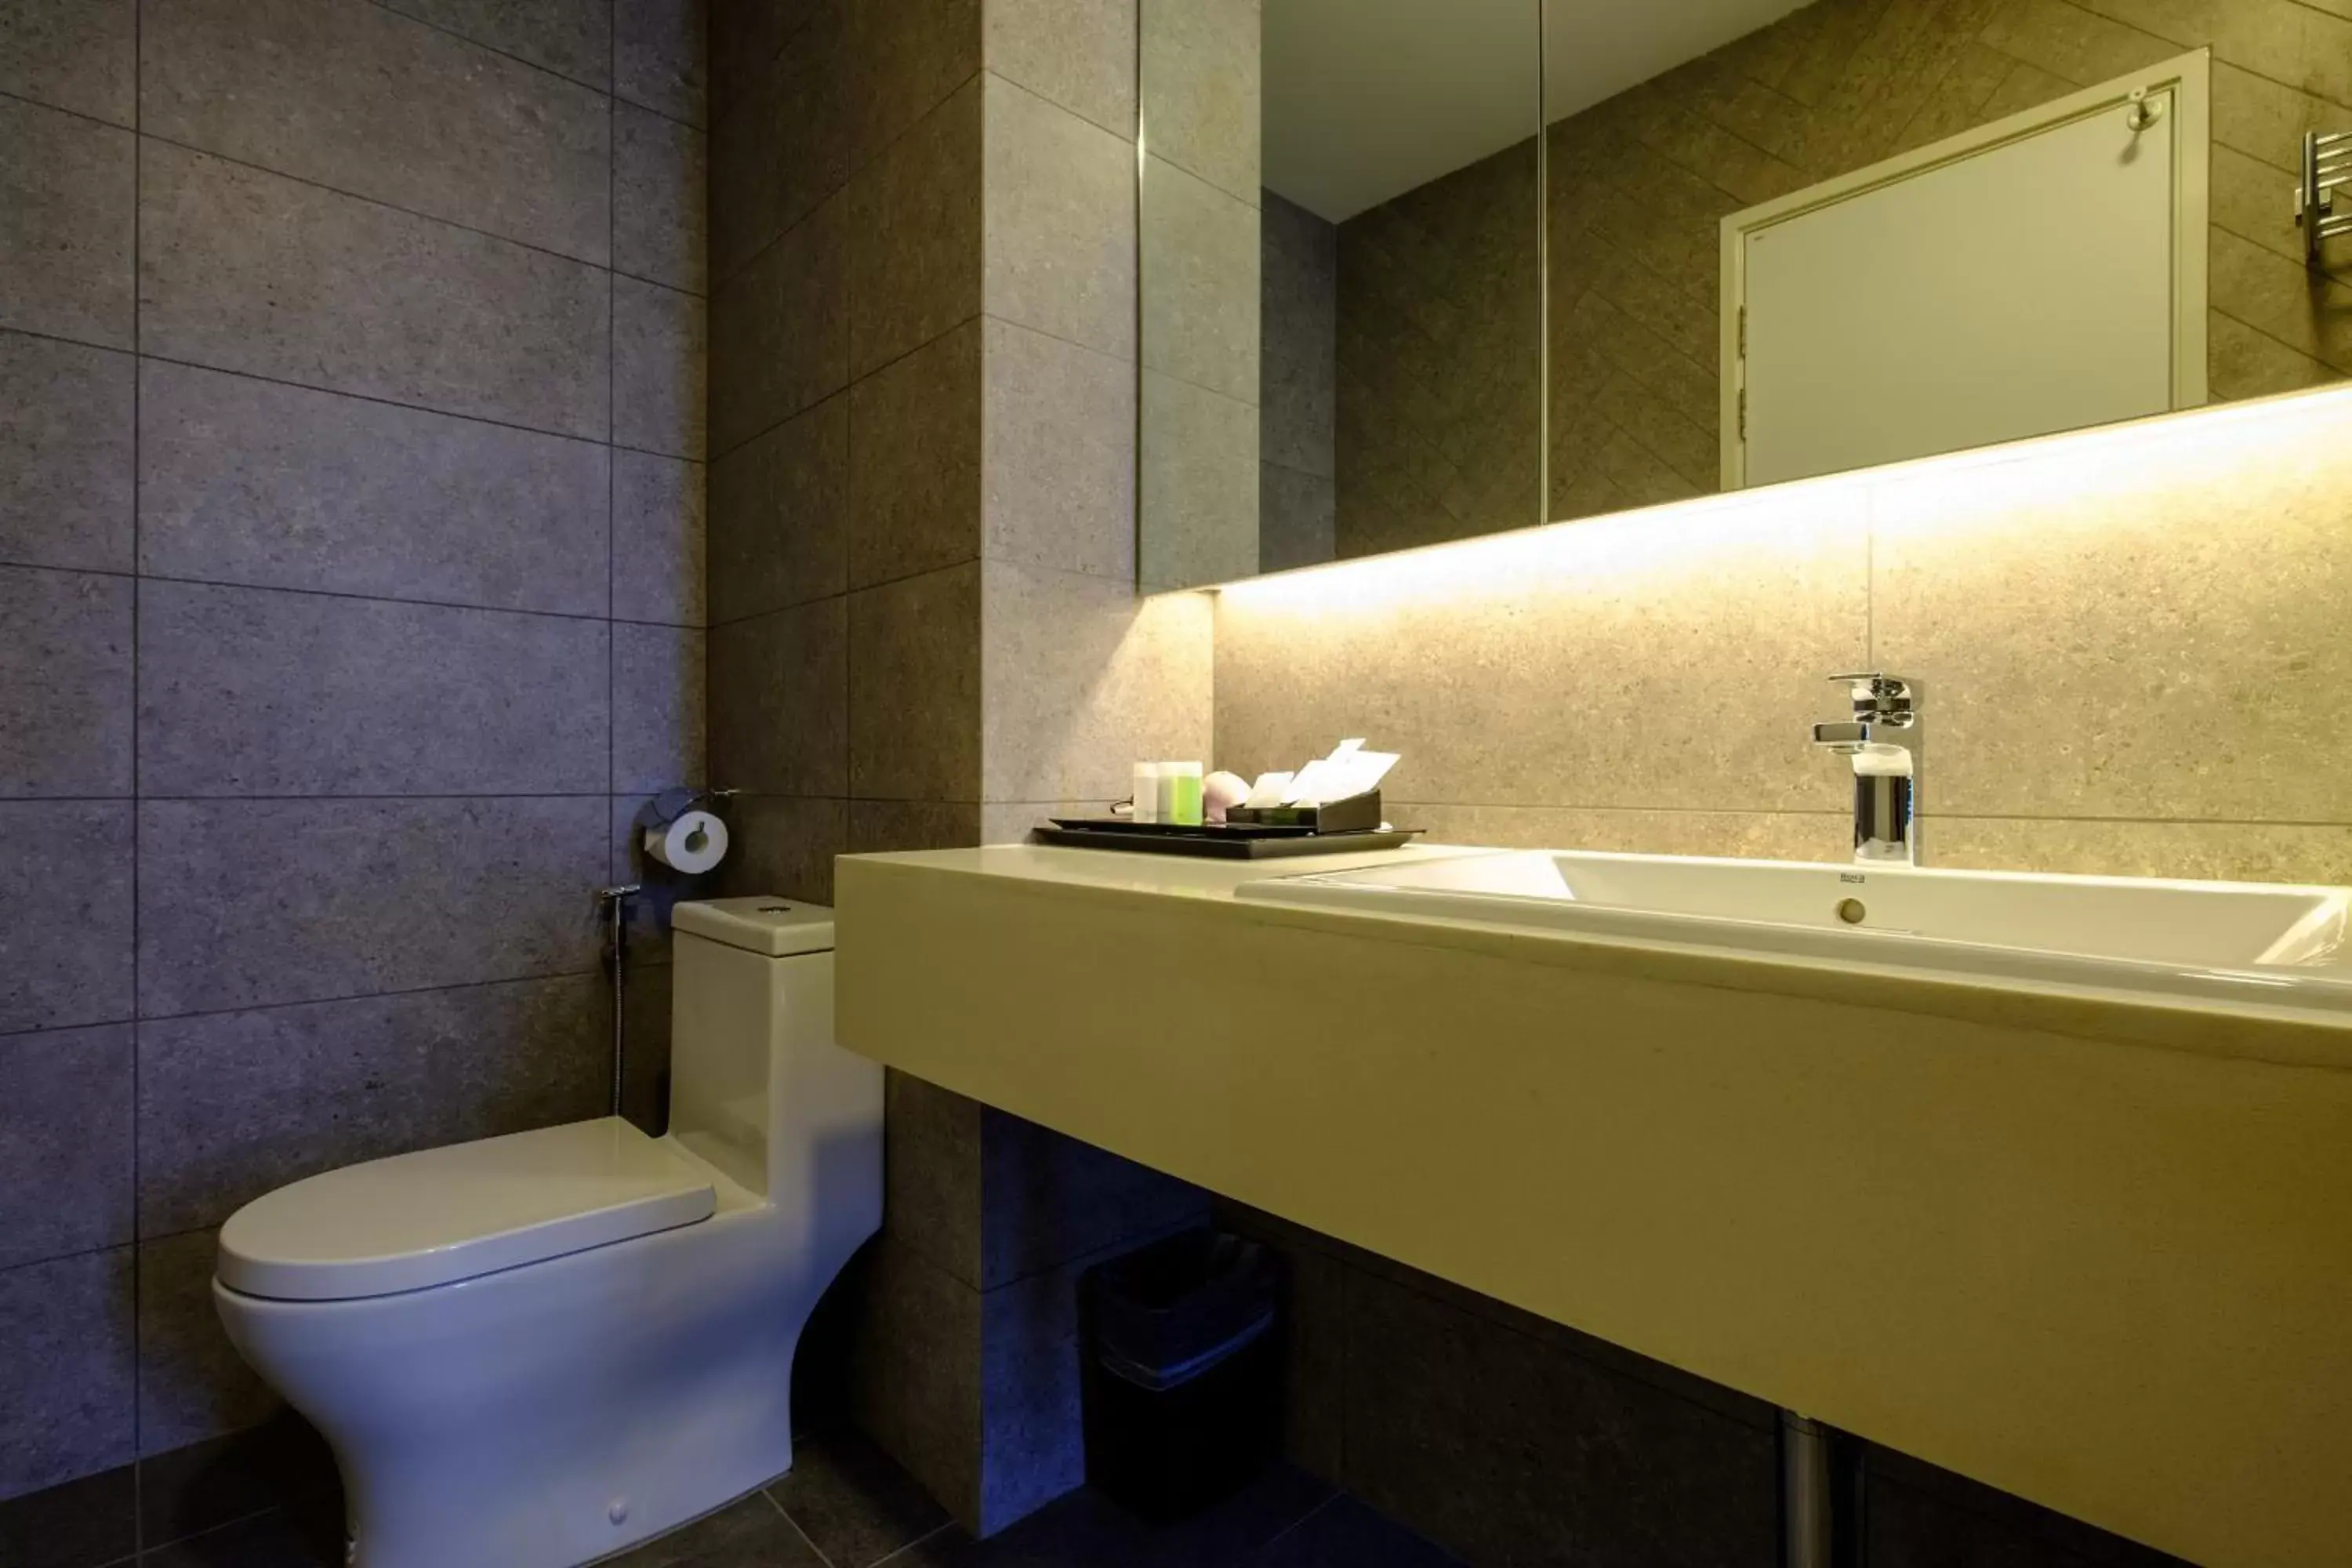 Bathroom in Tanjung Point Residences